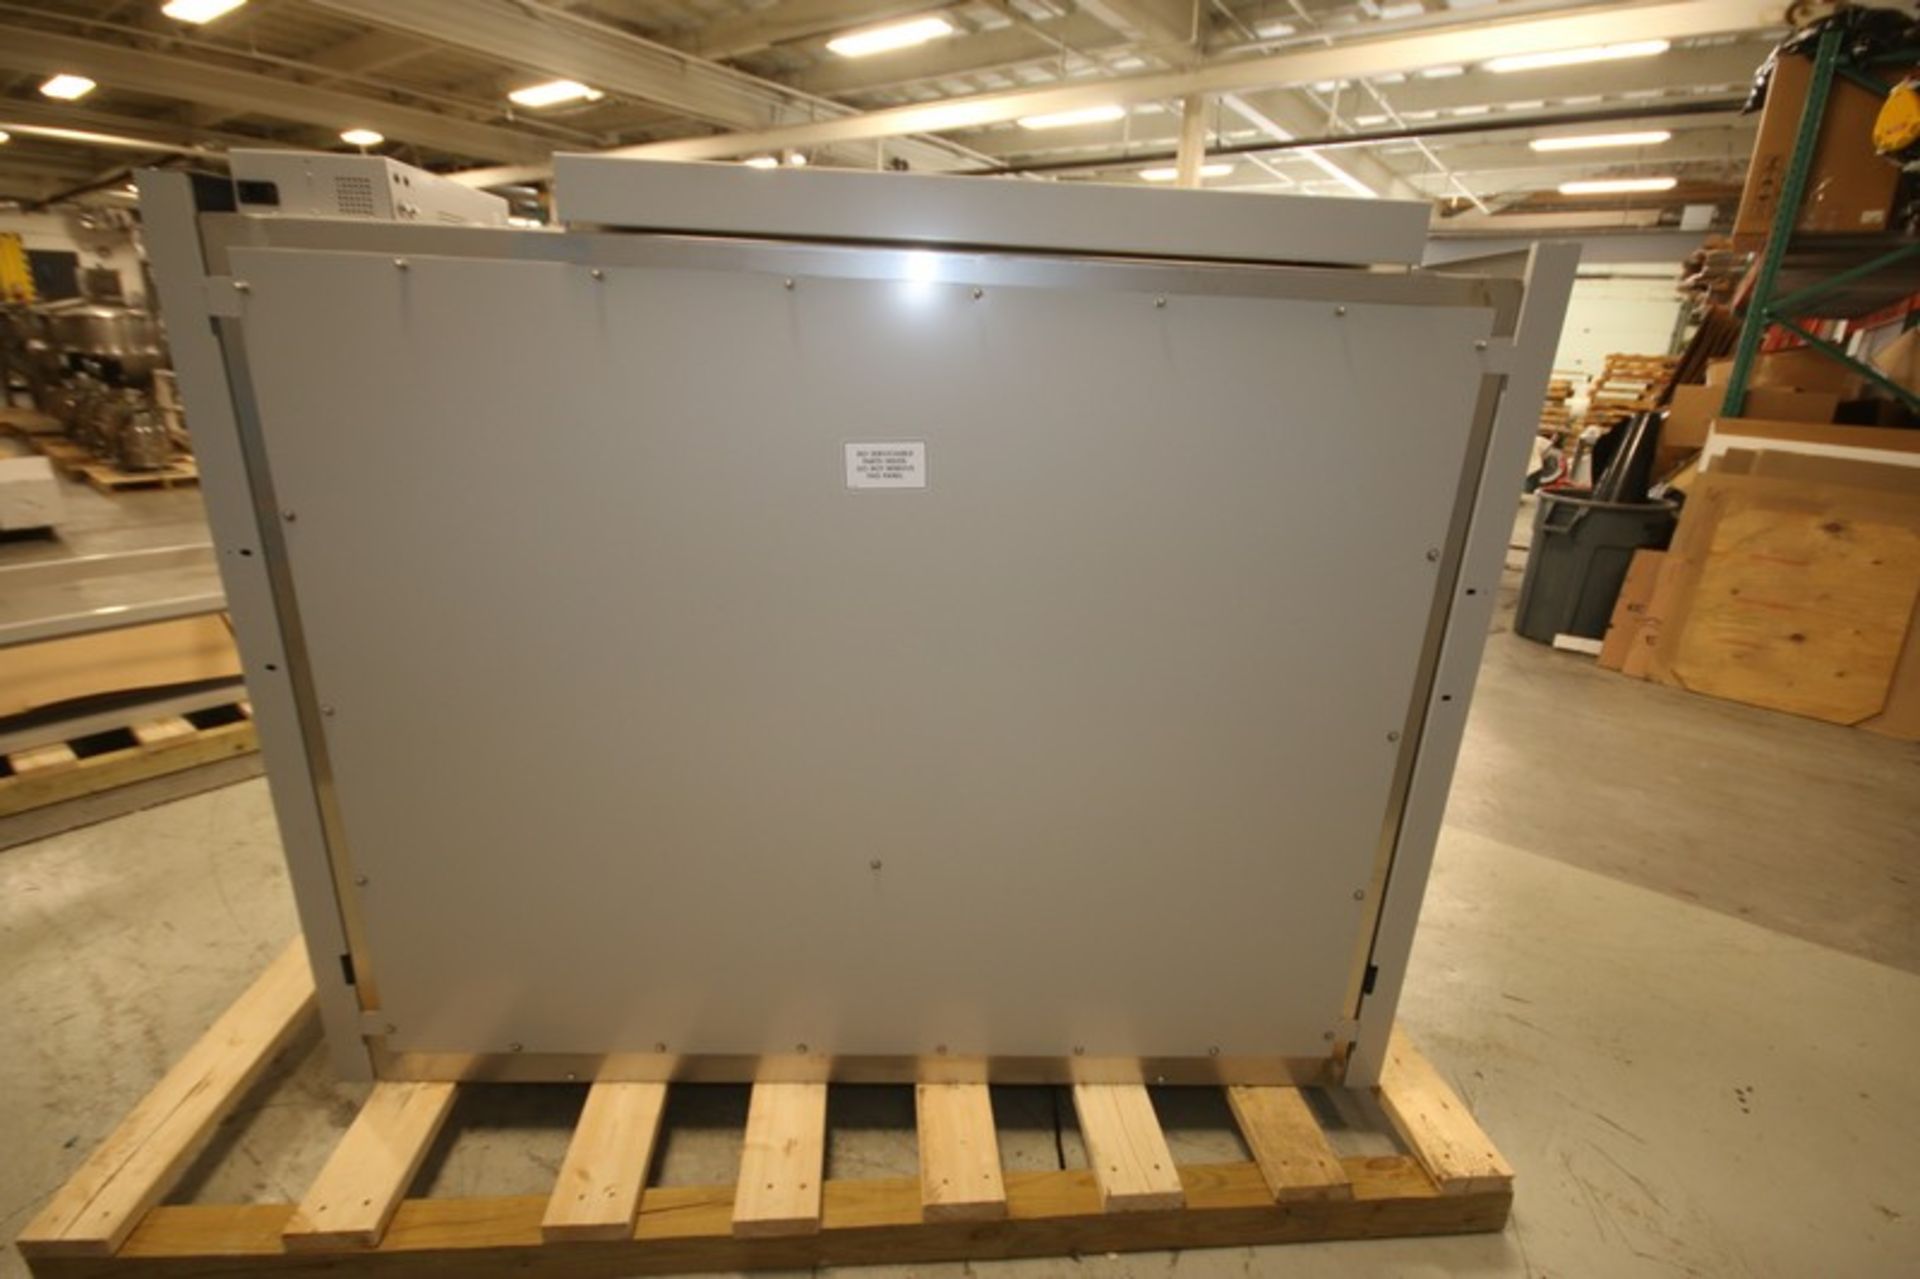 Labconco Aprox. 78" L x 31" W x 62" H A2 Lab Fume Hood, Cat. No. 302519100, SN 170846690 B with - Image 3 of 9